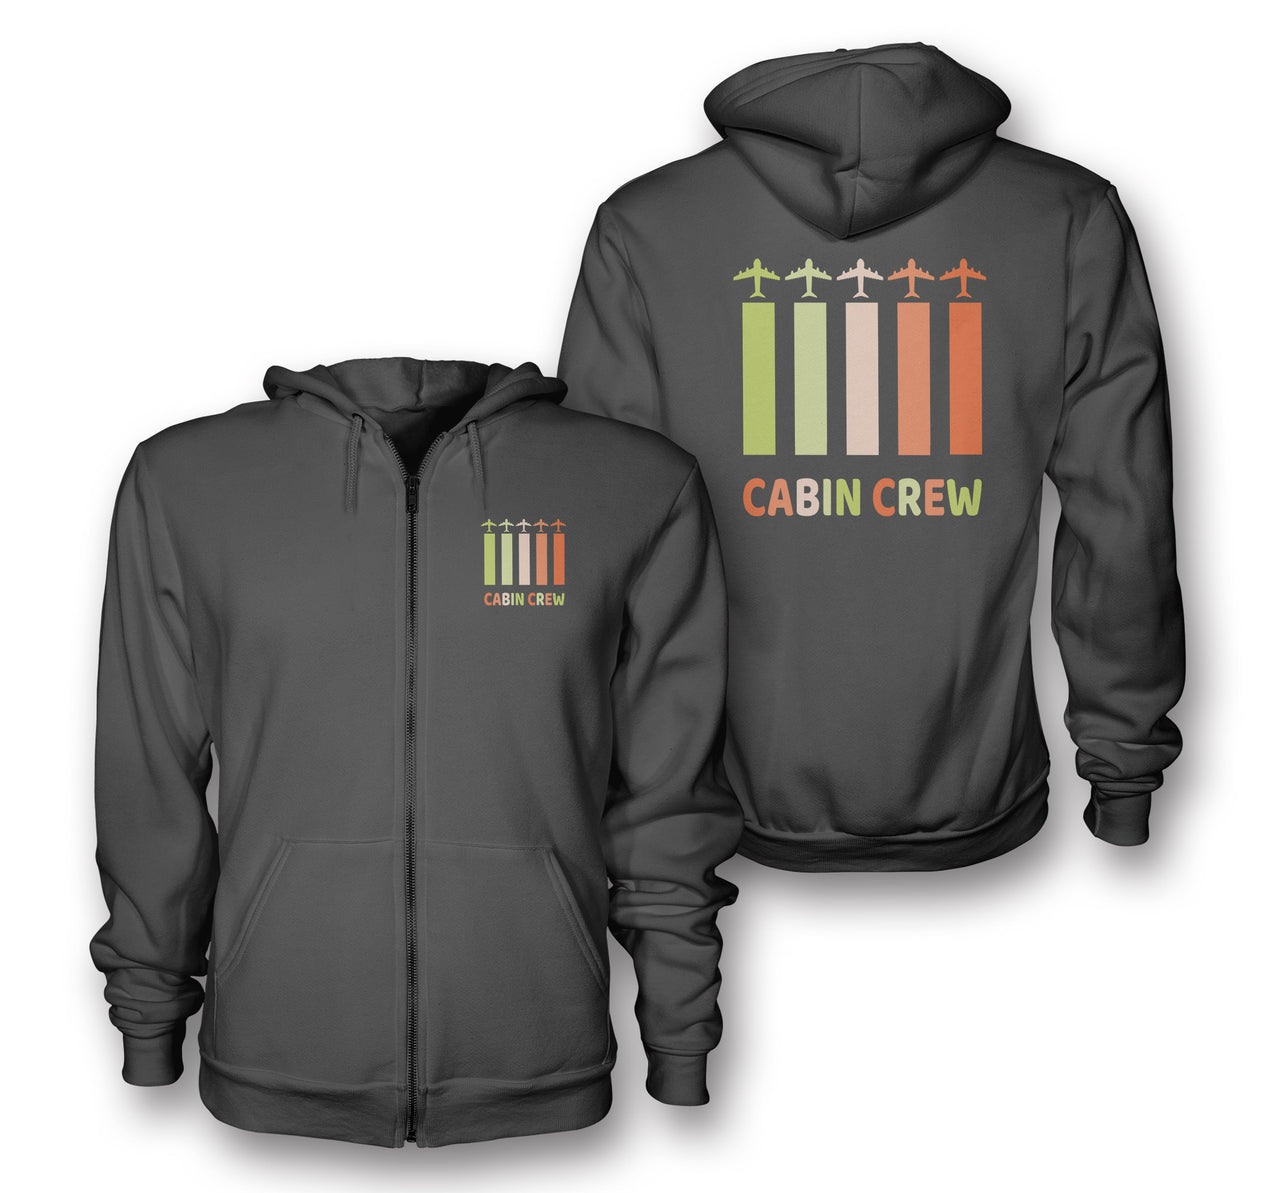 Colourful Cabin Crew Designed Zipped Hoodies